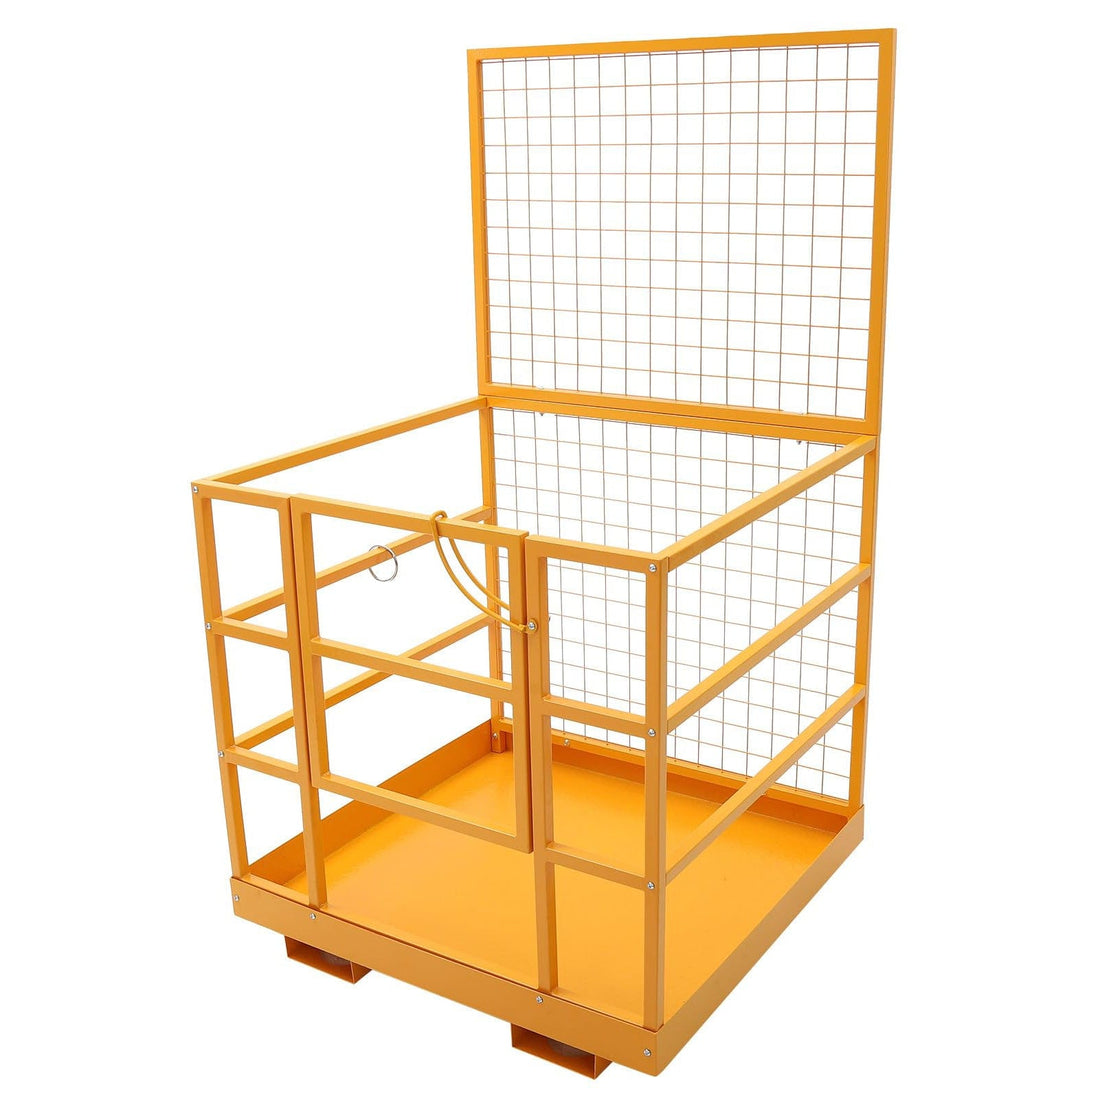 Forklift Safety Cage 43x45inches 1400LBS Capacity Forklift Heavy Duty Basket Man Platform